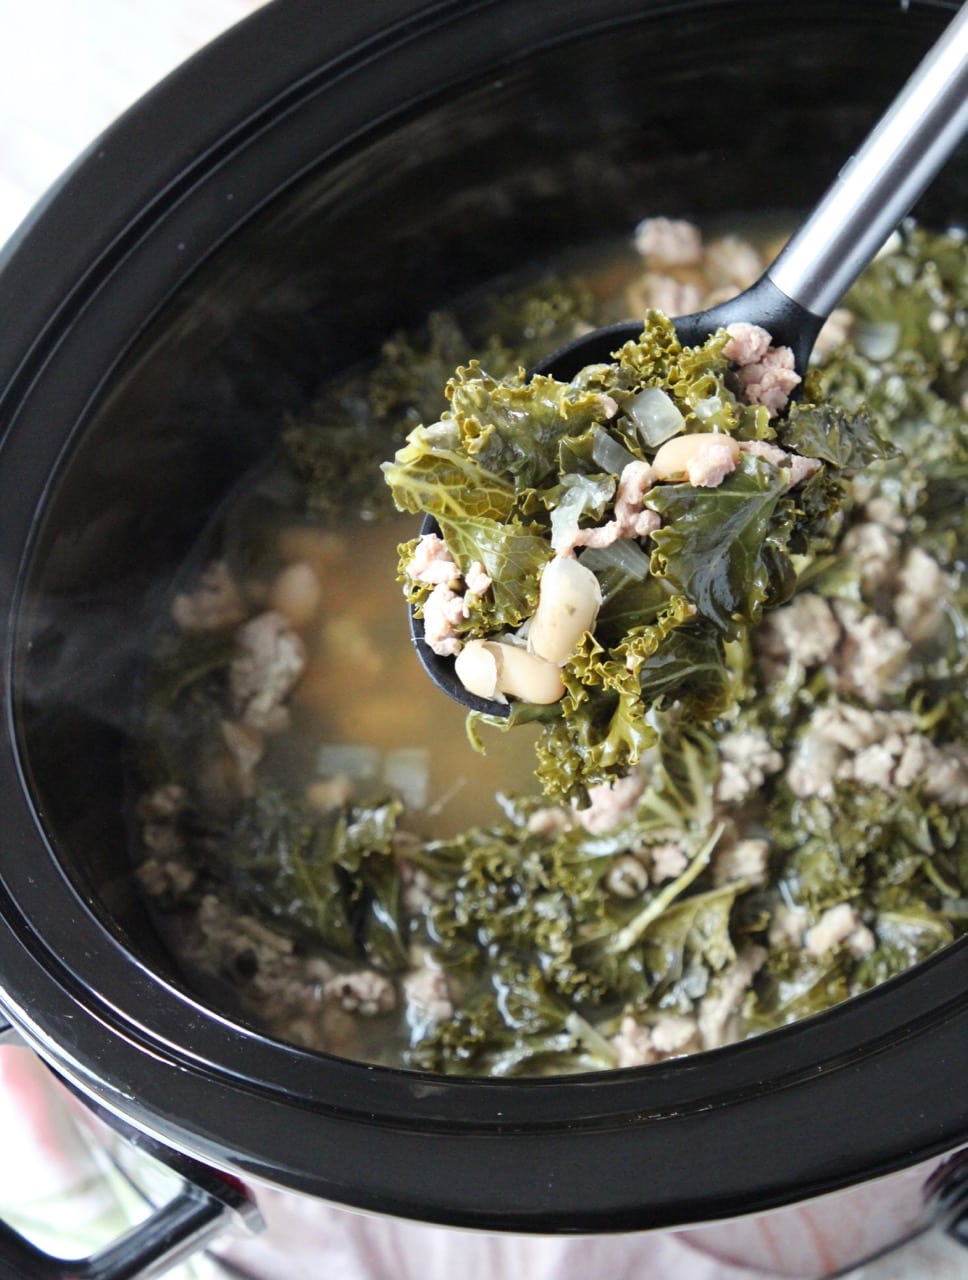 Turkey kale soup in spoon coming out of a crock pot full of soup